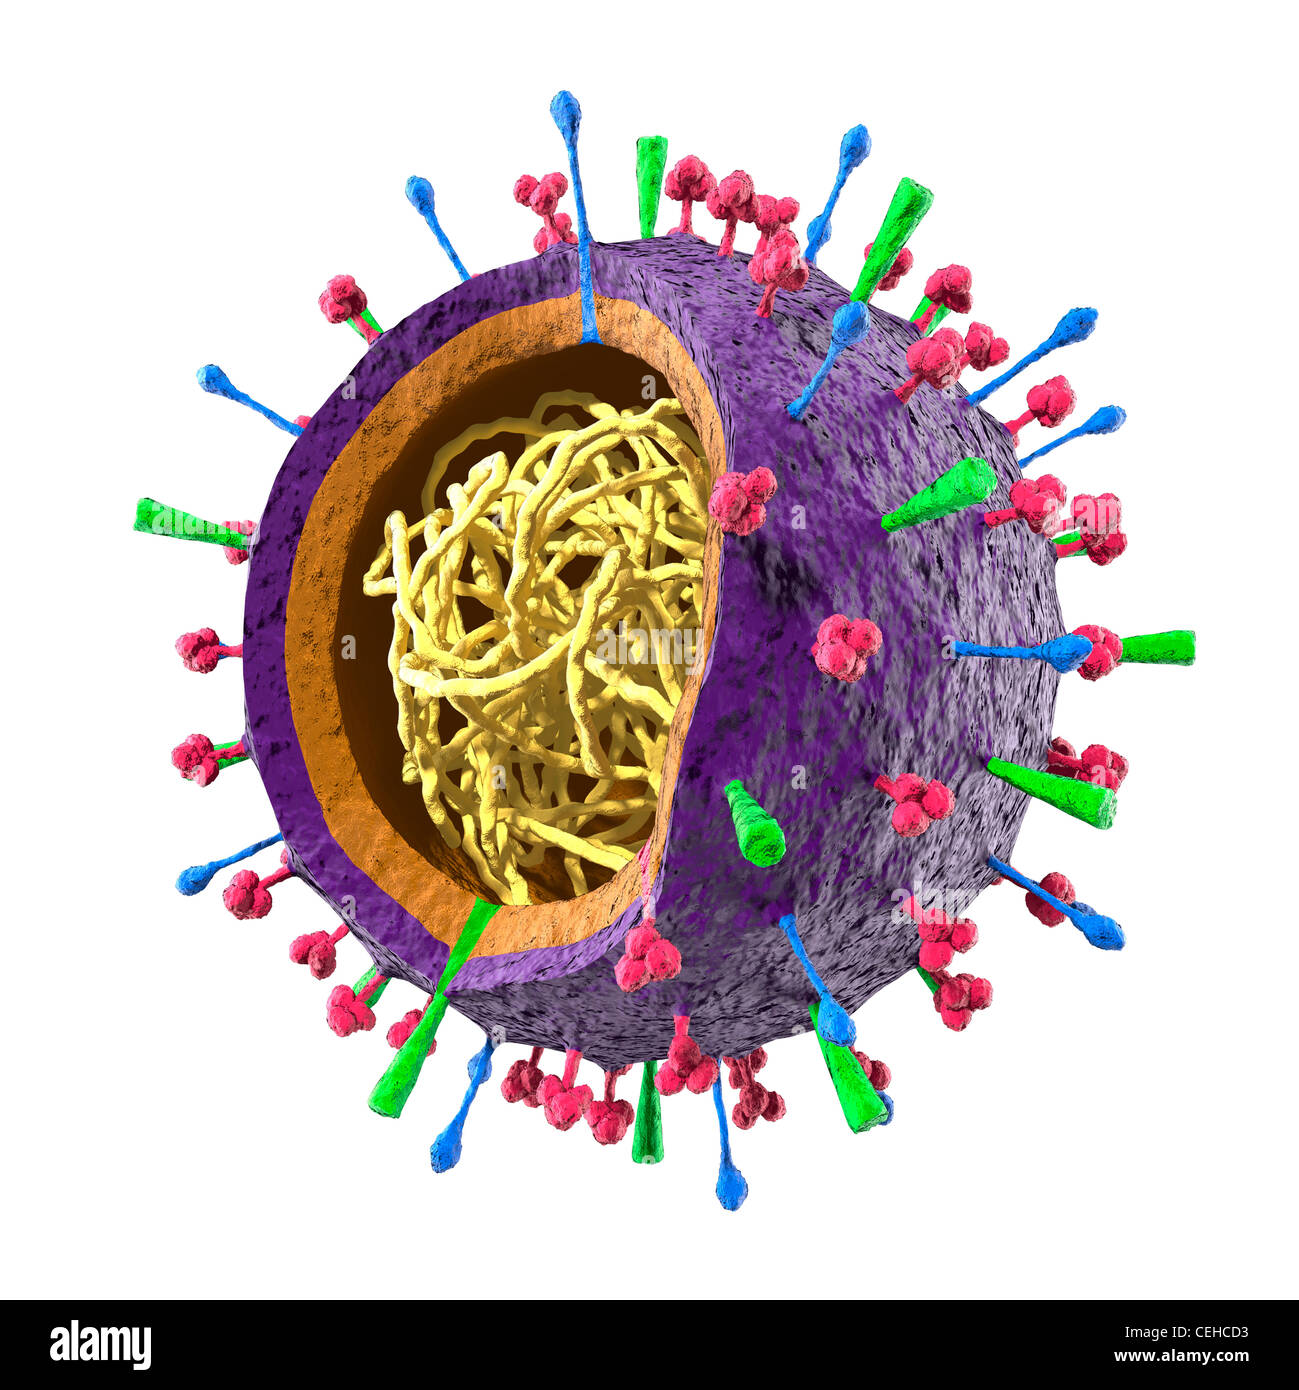 Colored particle of Flu virus H1N1 H5N1 influenza A virus - virion structure. 3D illustration isolated on white background Stock Photo